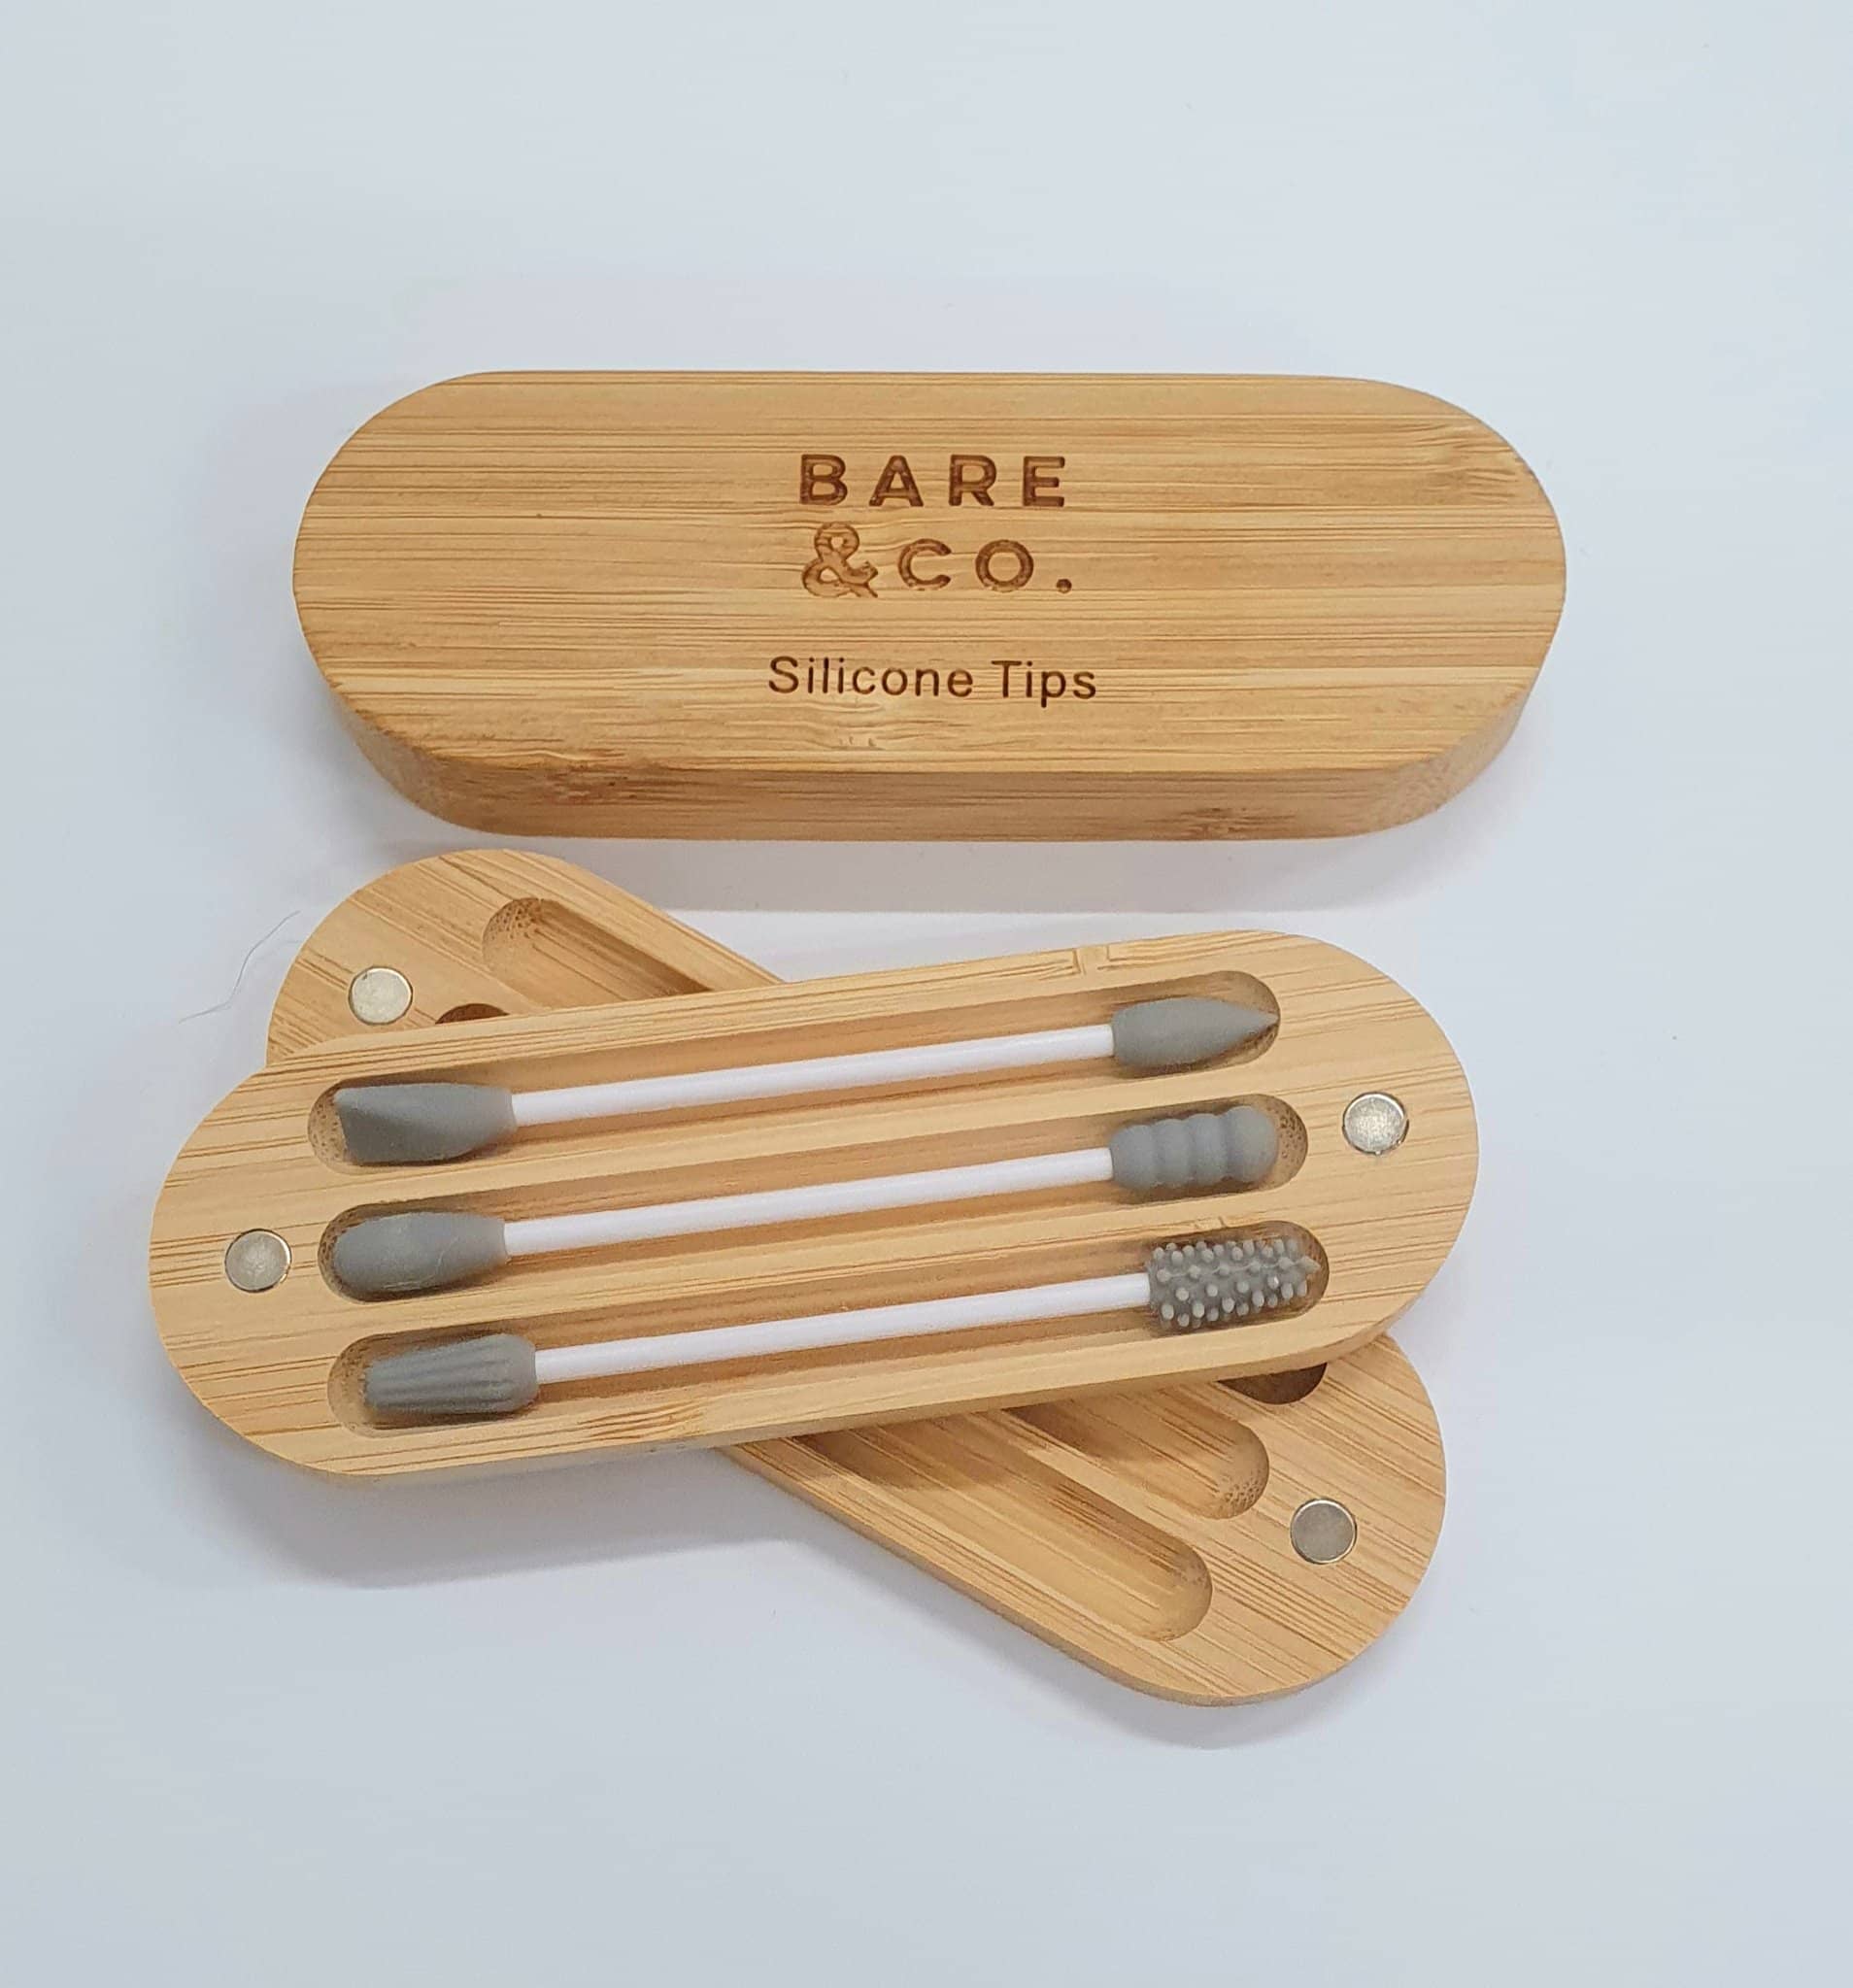 Bare & Co. Reusable Beauty Tips with Bamboo Case